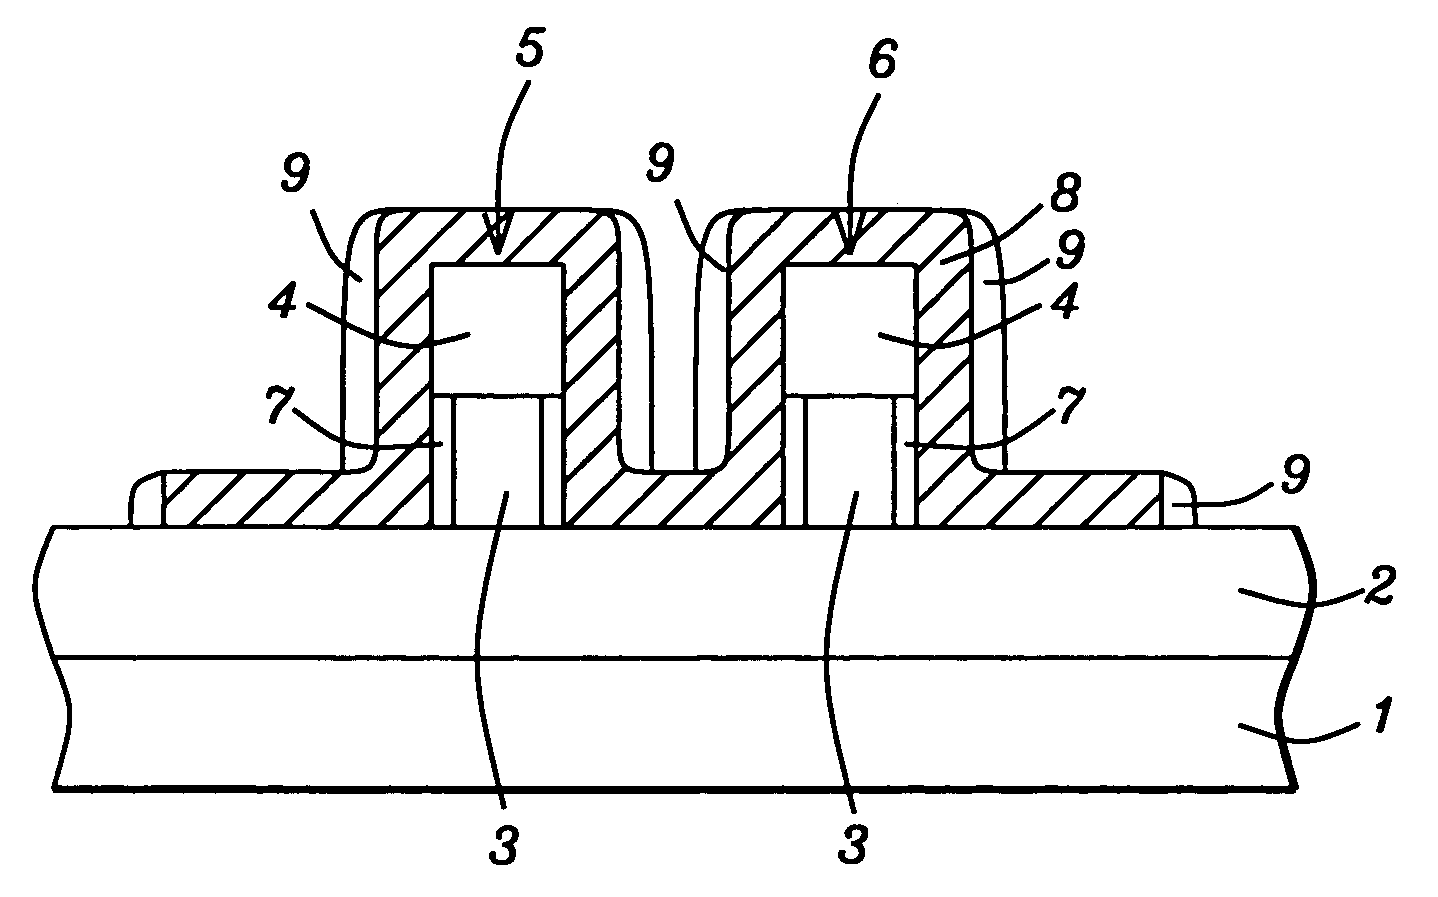 Method of forming an N channel and P channel finfet device on the same semiconductor substrate